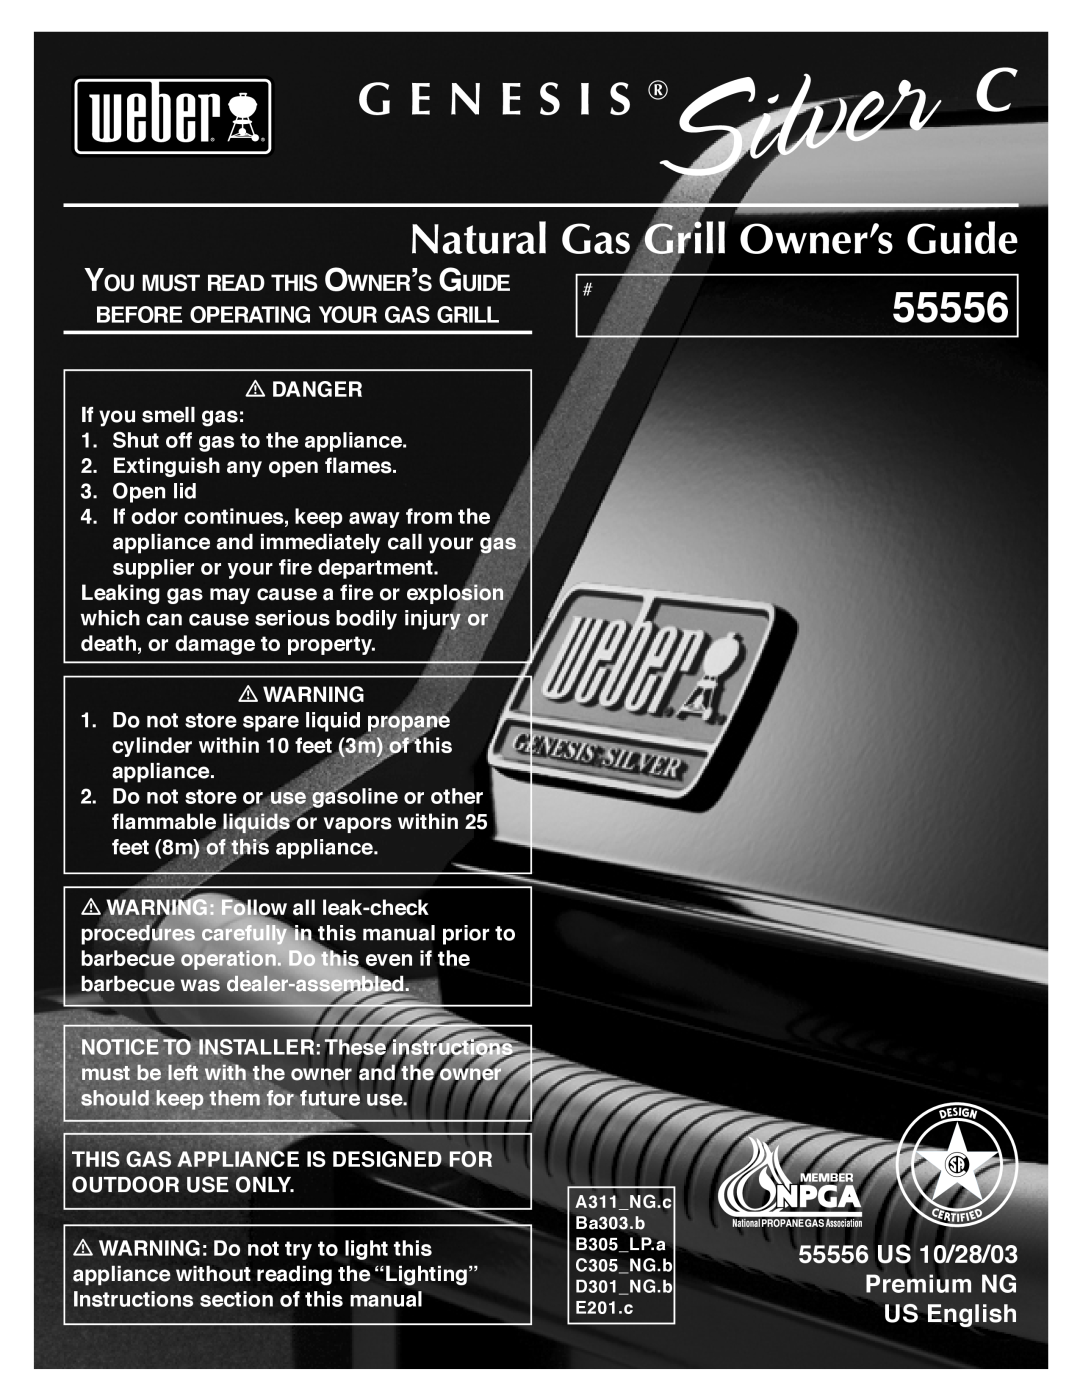 Weber manual Natural Gas Grill Owner’s Guide, G E N E S I S, 55556 US 10/28/03 Premium NG US English 